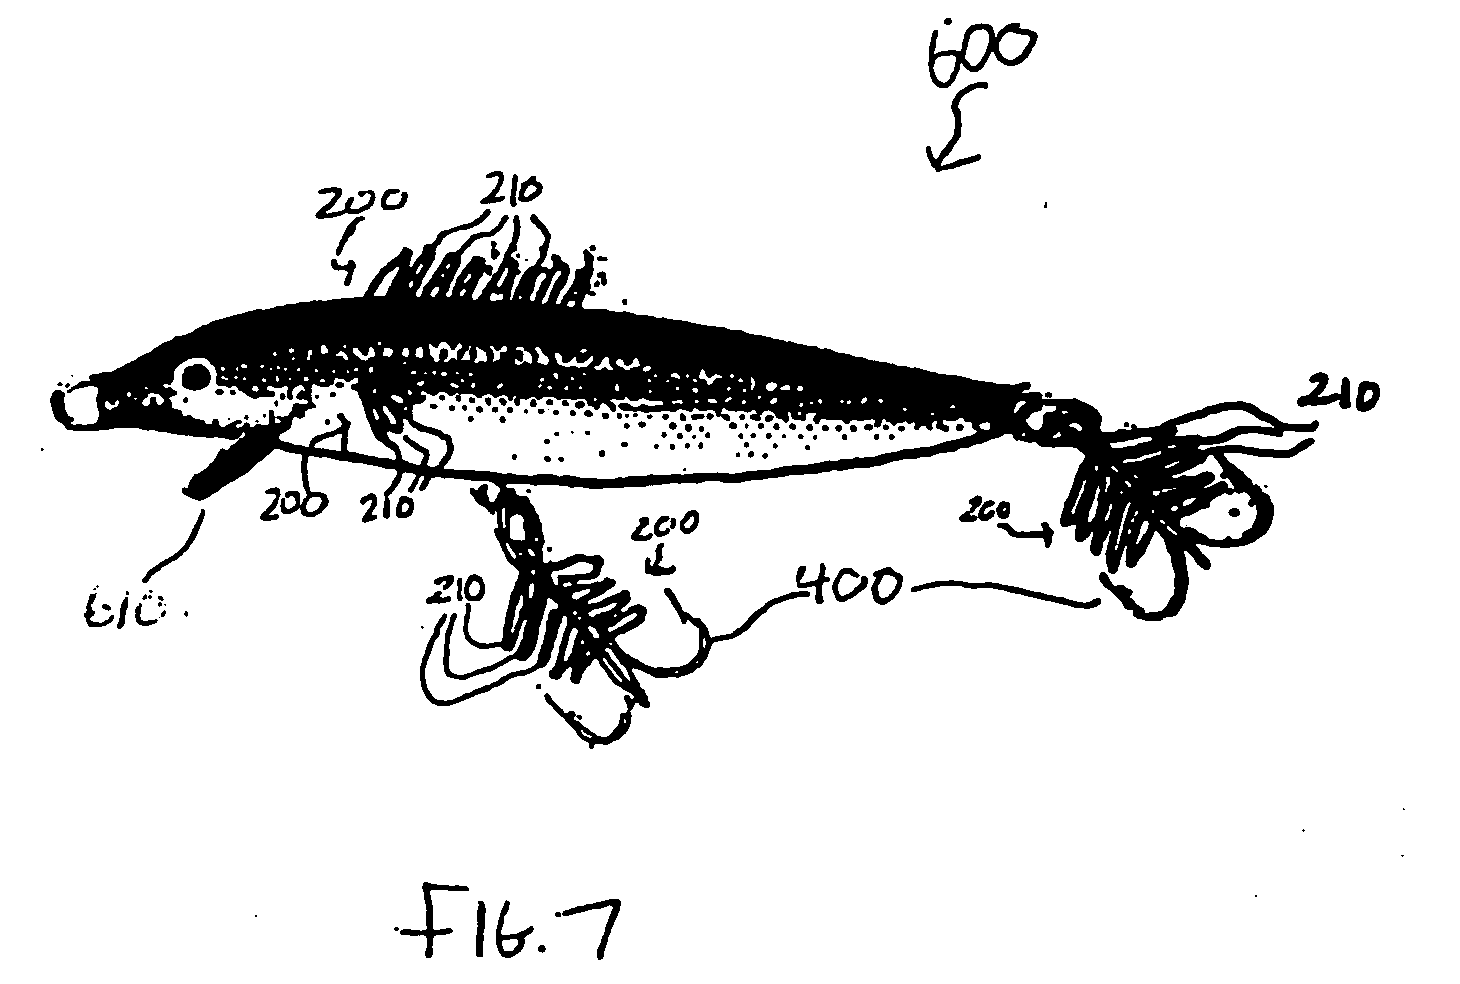 Fishing lure including looped fiber-based materials